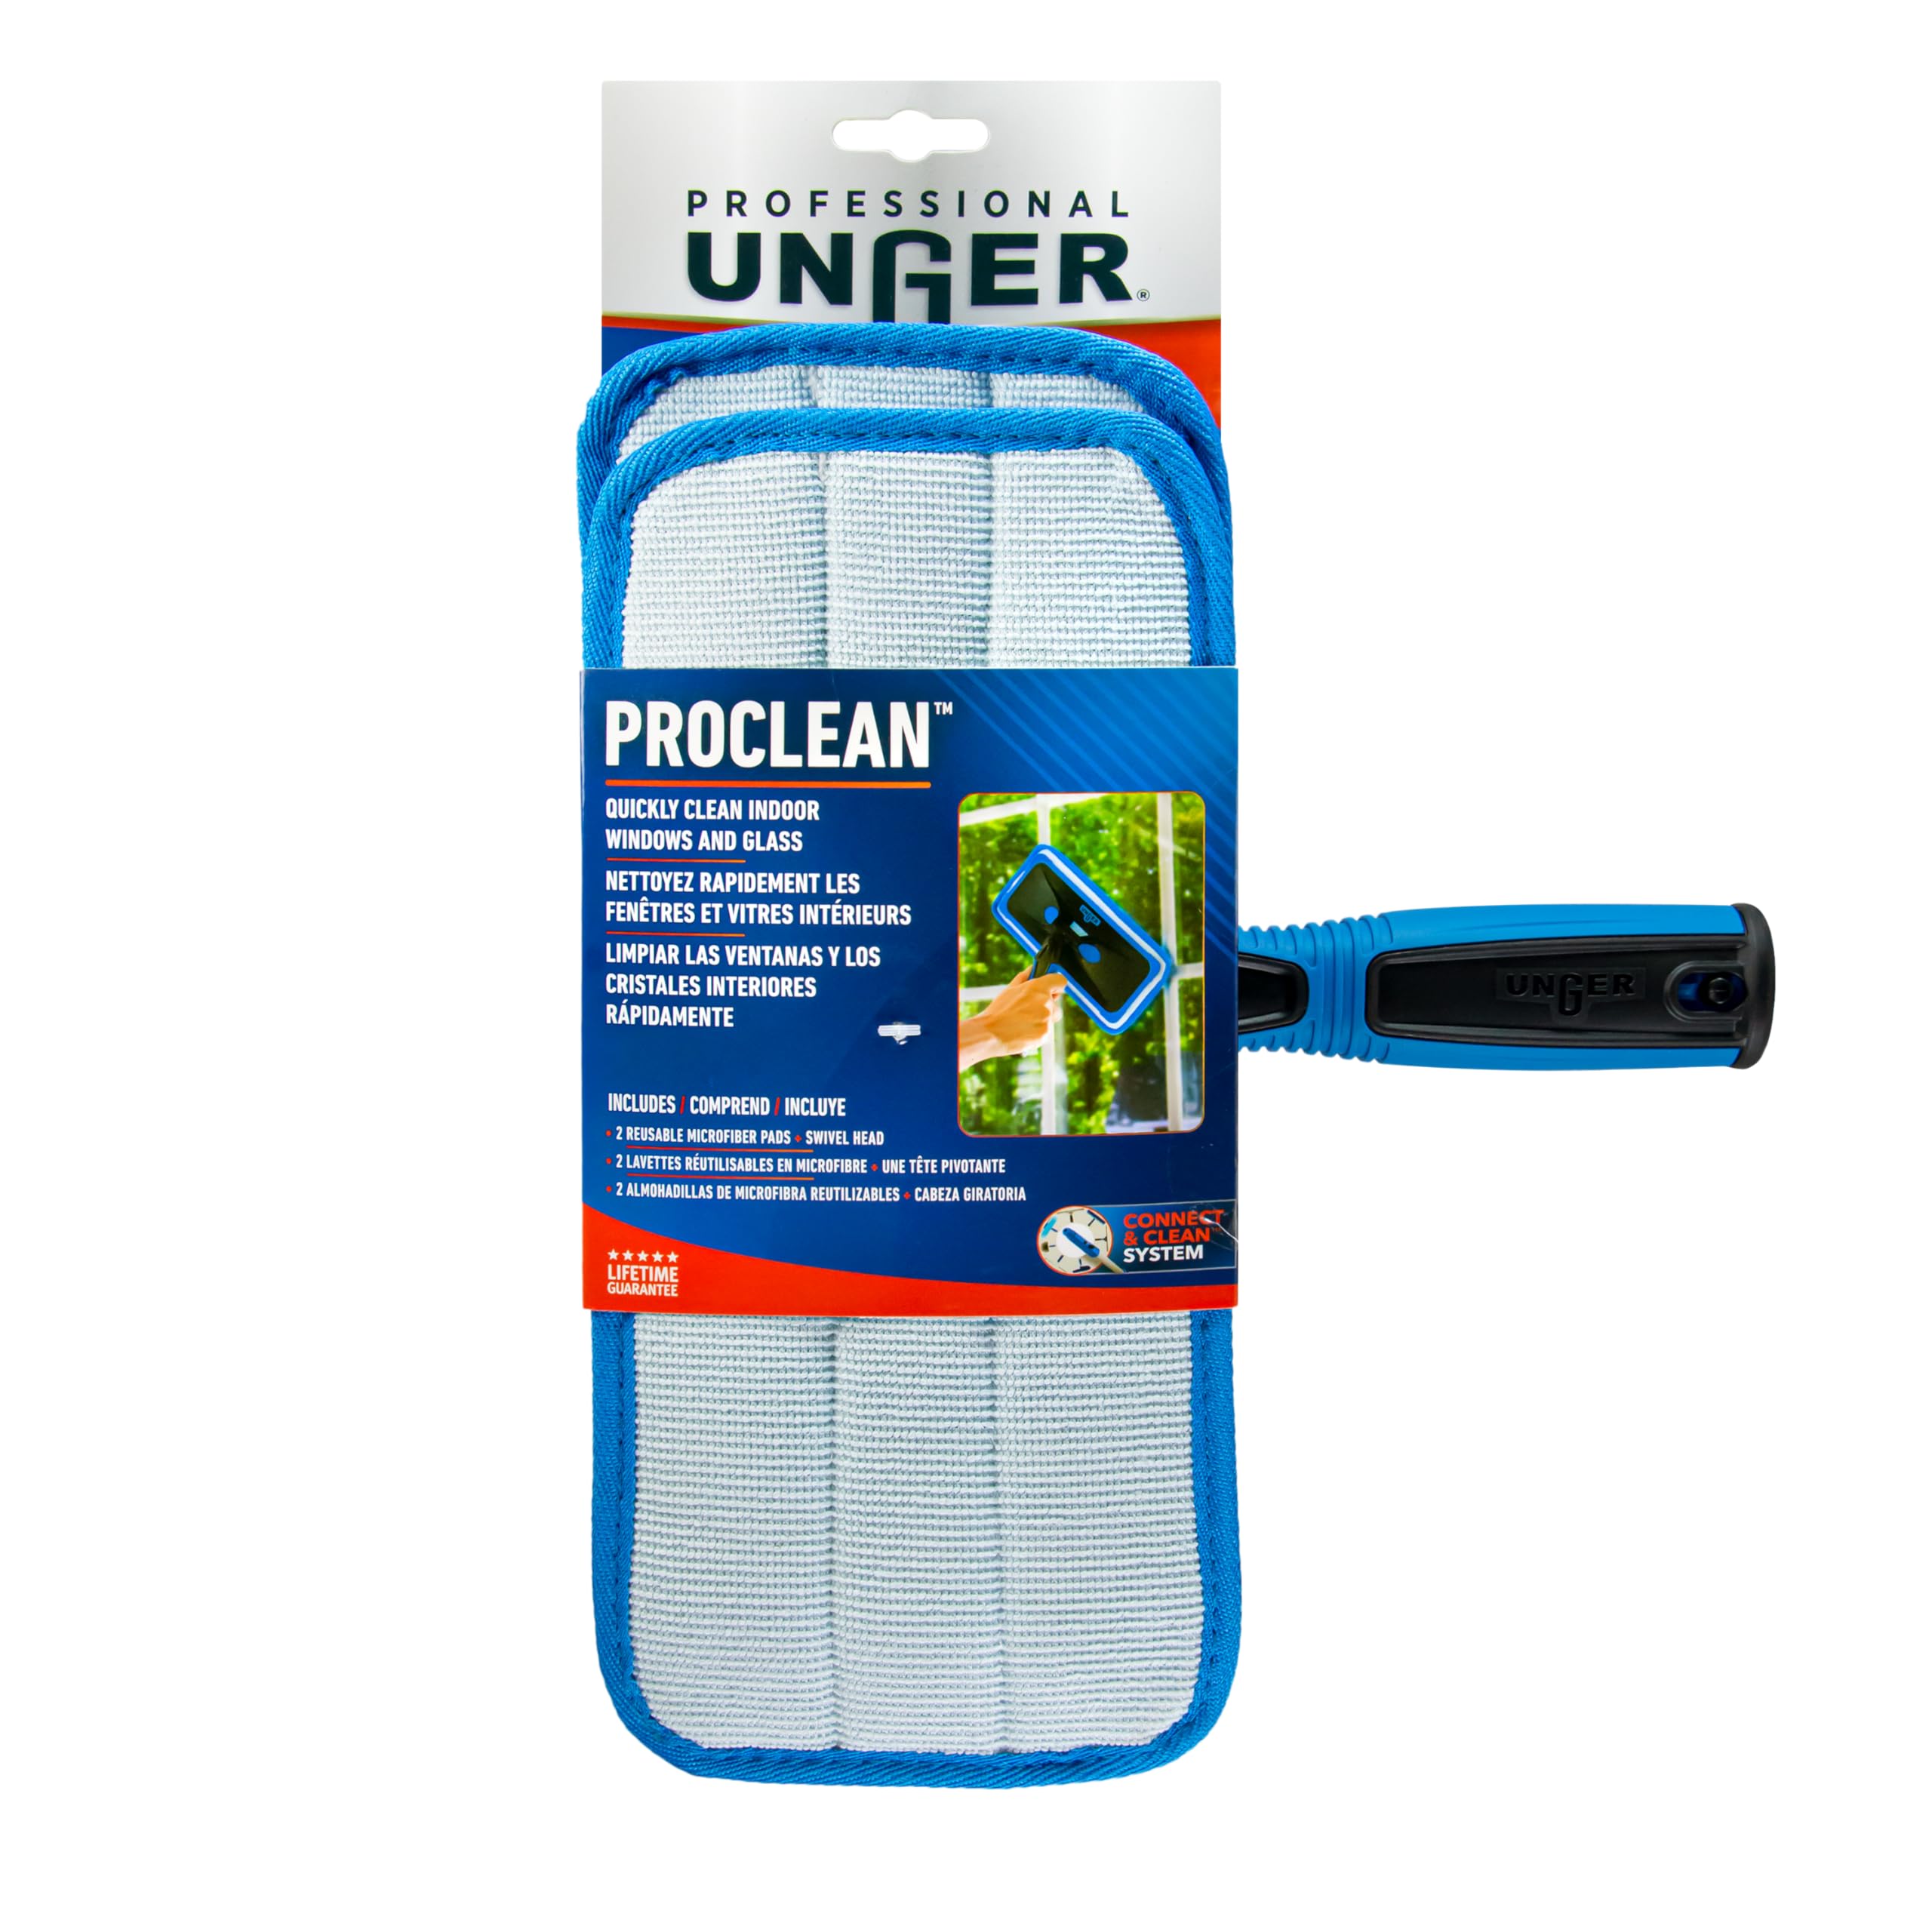 Unger ProClean Indoor Window Cleaner, Tool for Window, Glass, and Mirror Cleaning, Streak-Free Results, Reusable Microfiber Pads for Sustainability